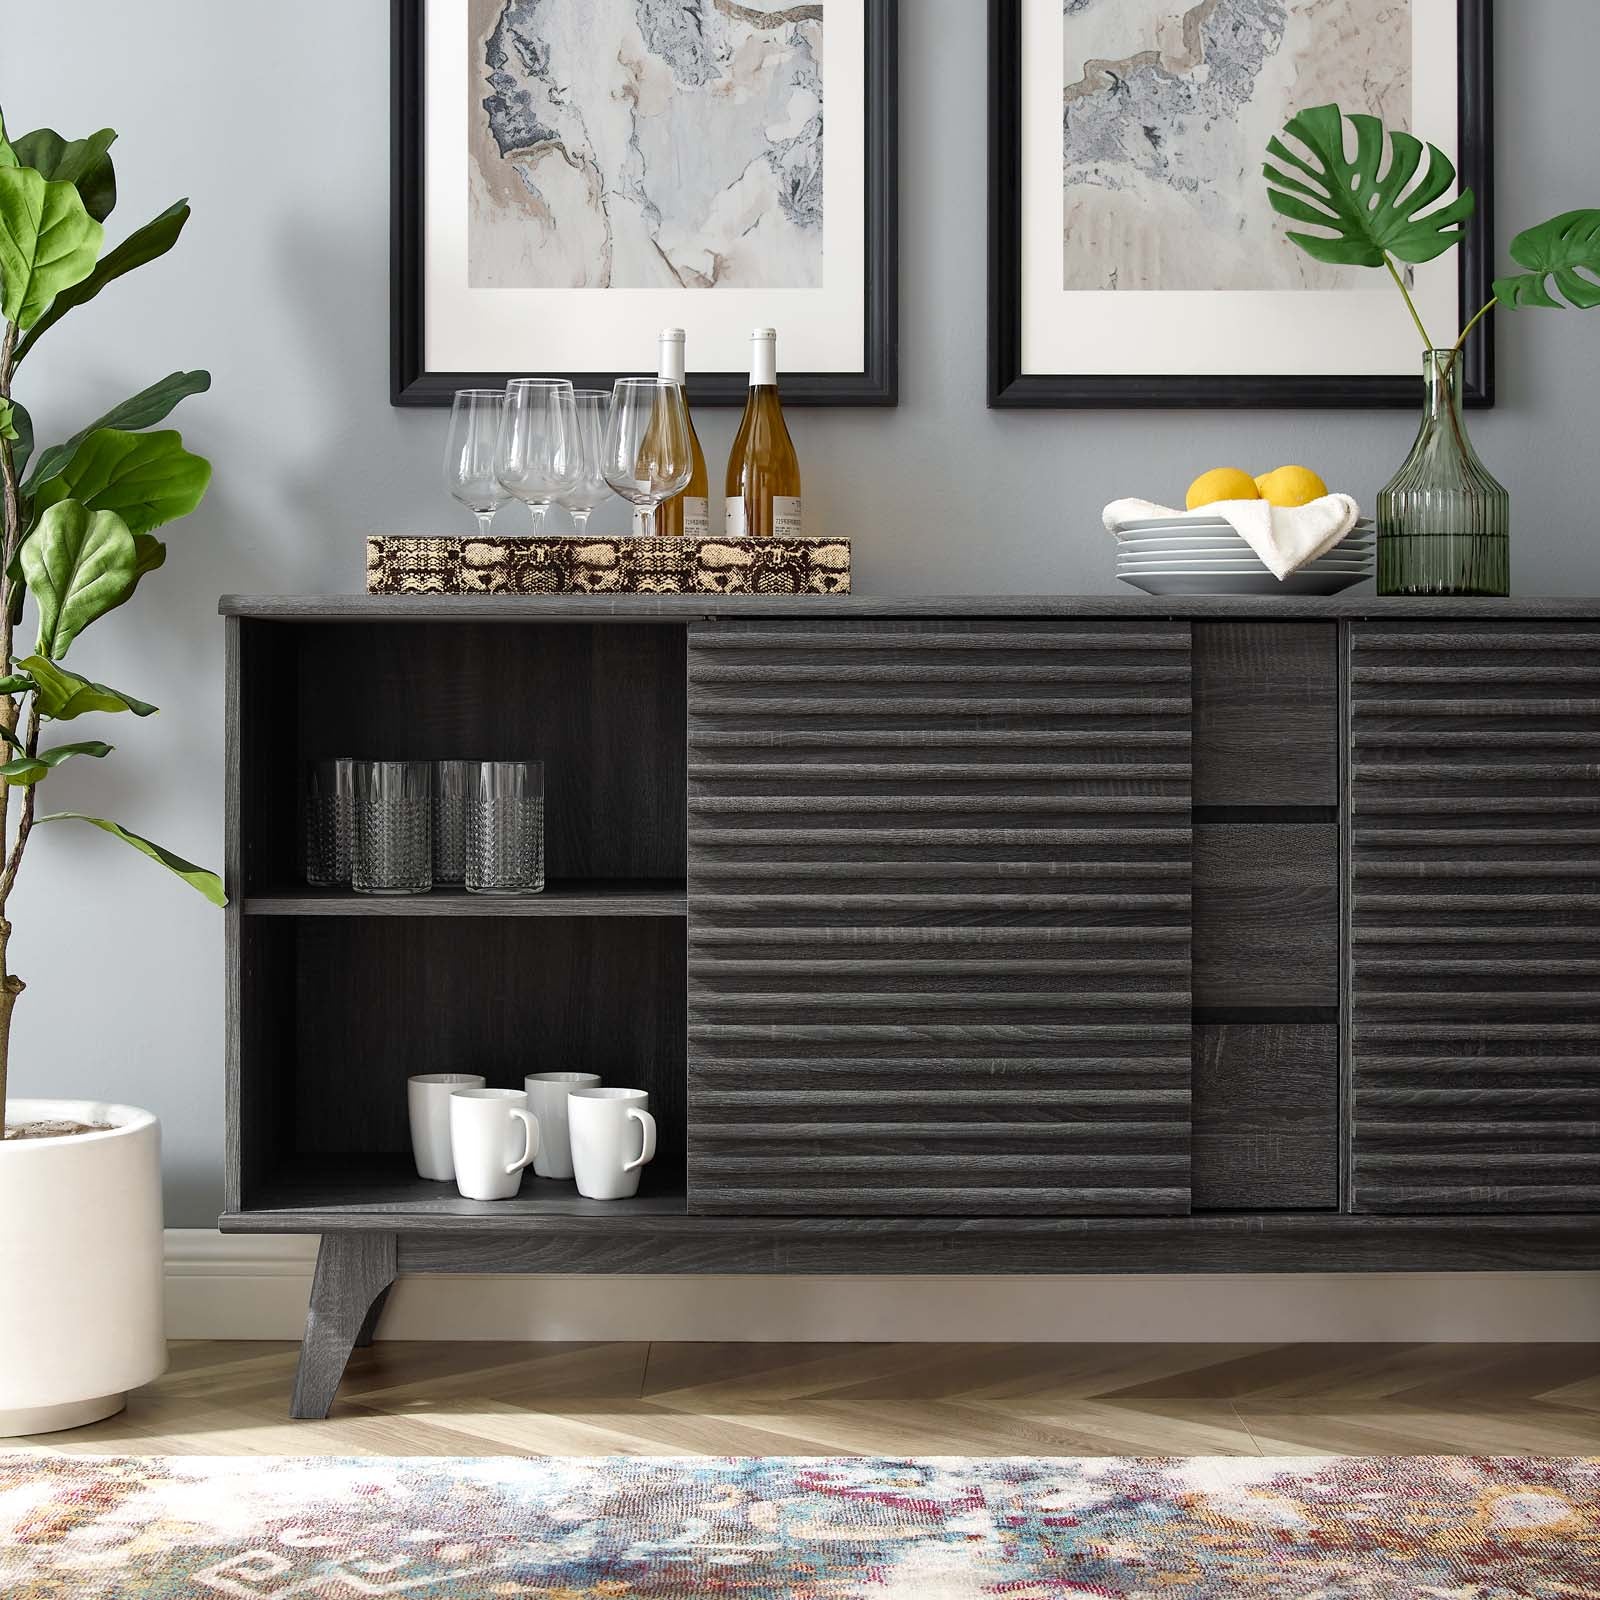 Render 63" Sideboard Buffet Table or TV Stand - East Shore Modern Home Furnishings